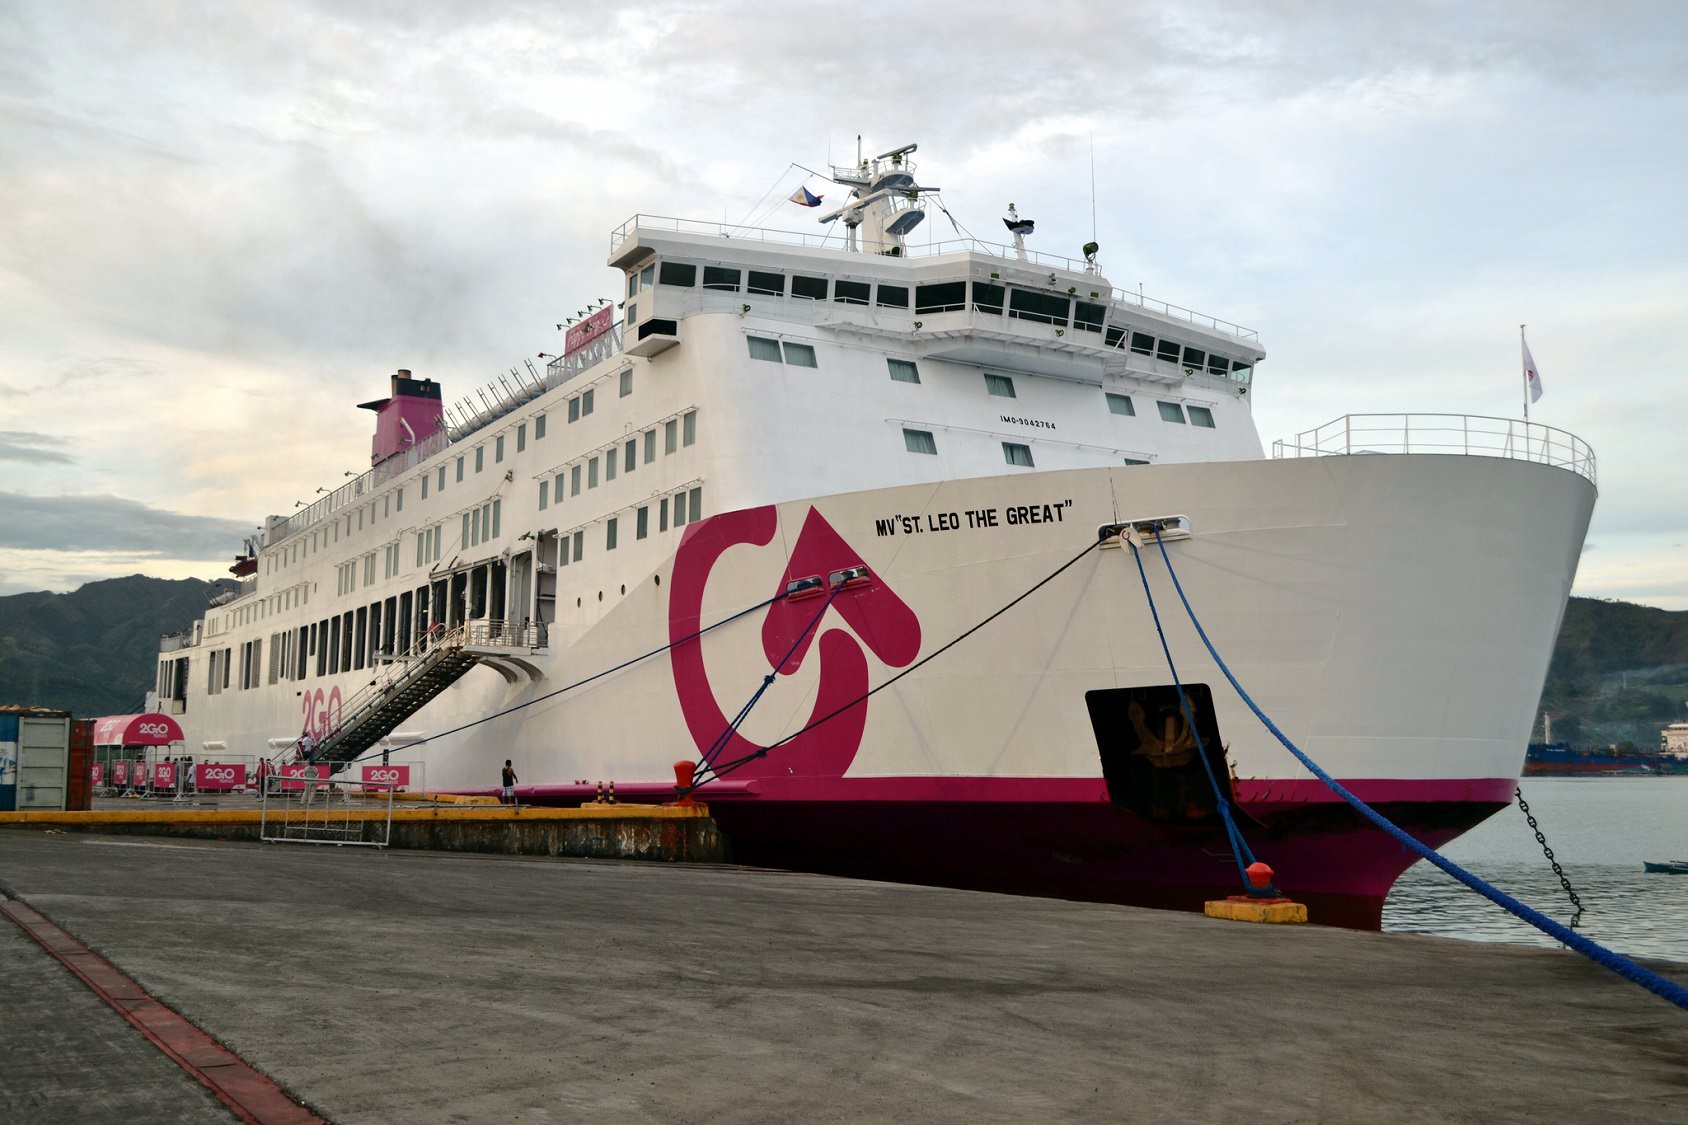 Ferry 2go travel, ferry tickets and ferry service between Manila, Puerto Princesa and Coron, Palawan, buy tickets 2go ferry to Palawan online